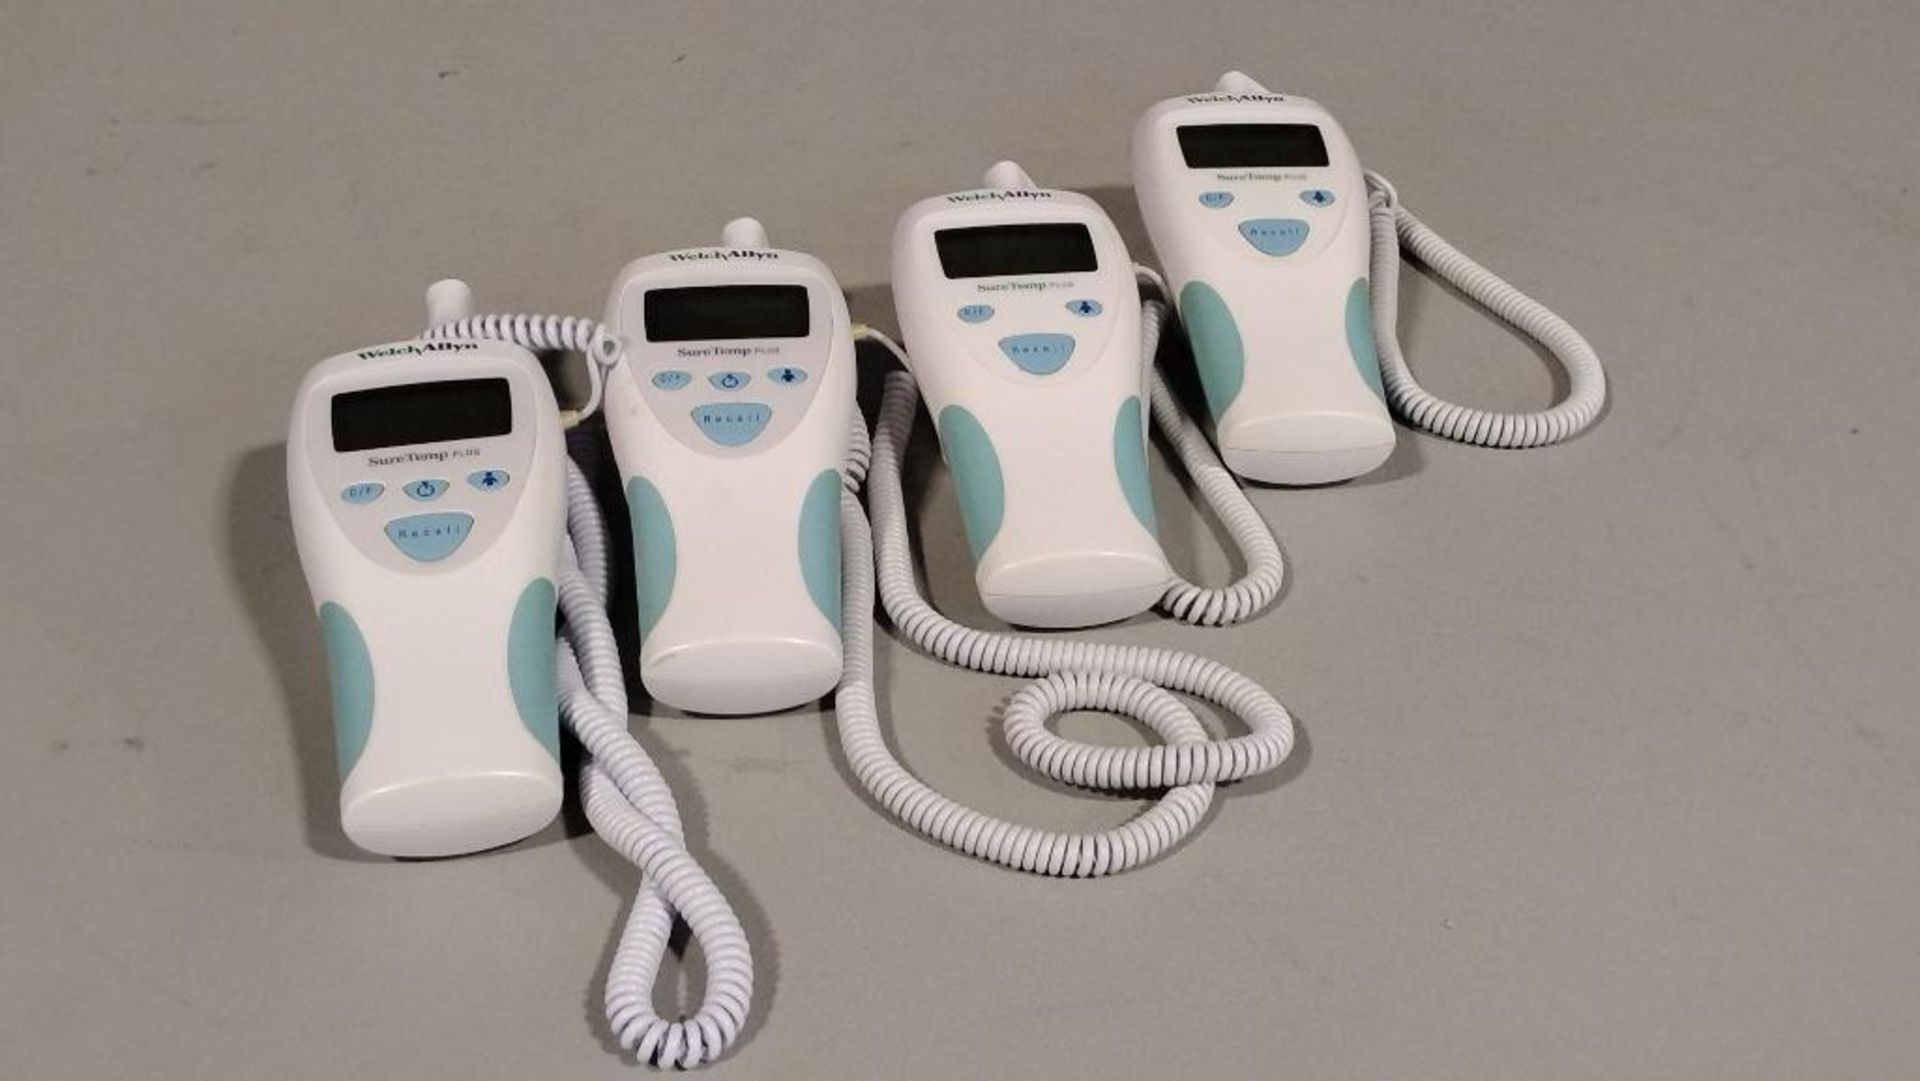 WELCH ALLYN SURE TEMP PLUS THERMOMETERS